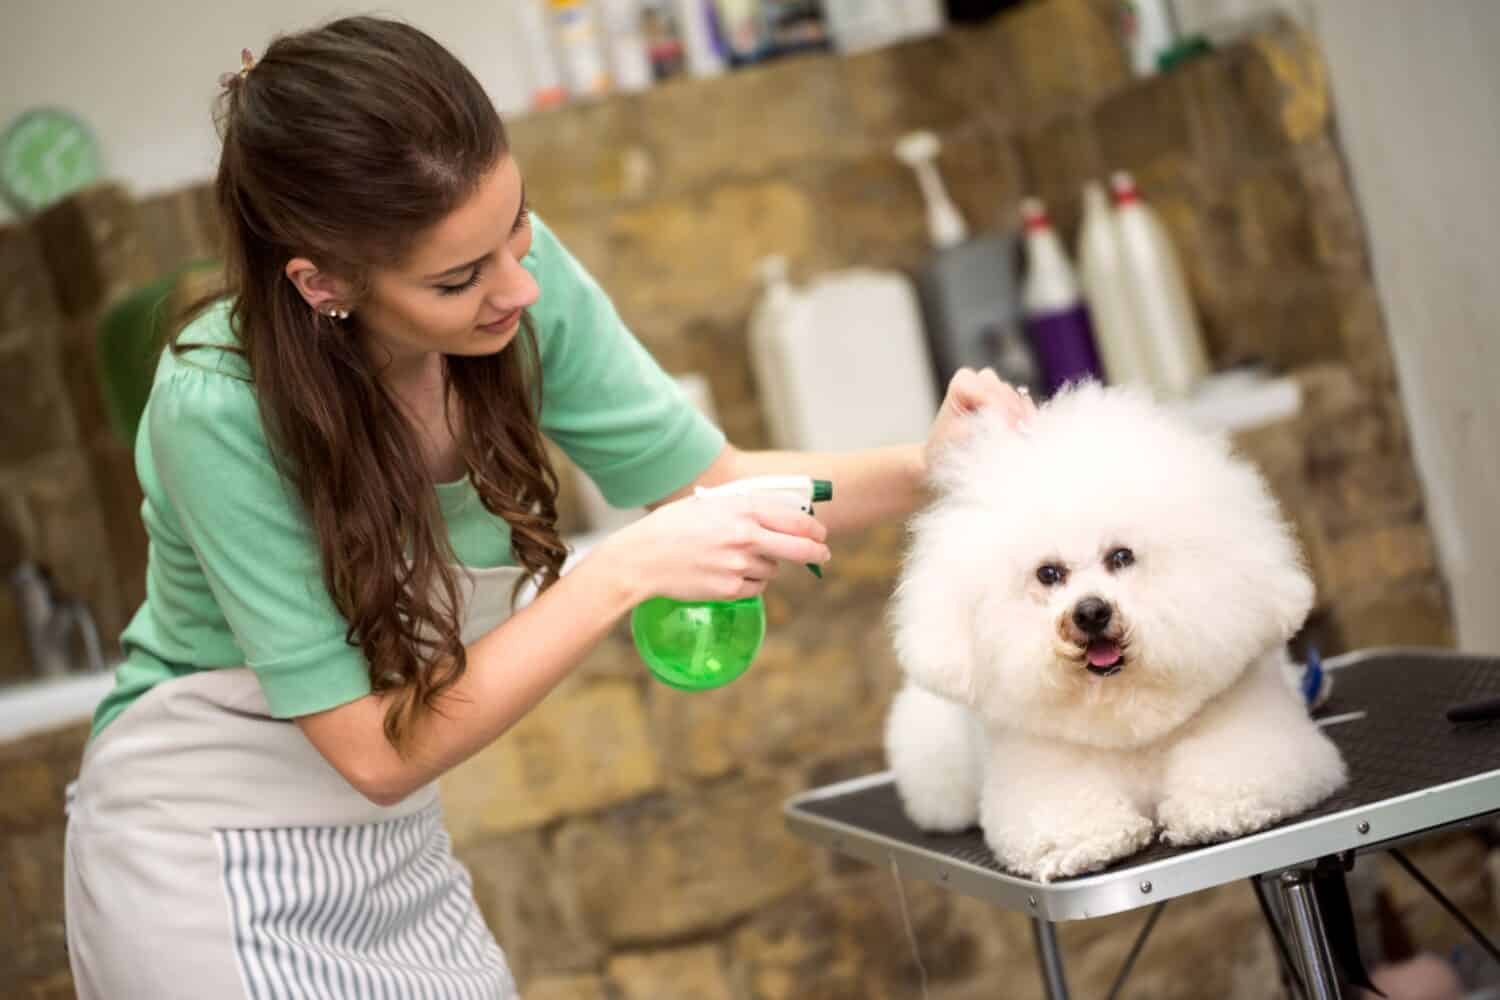 hairspray for hairstyle for bichon frise. Dog gets hair cut at Pet Spa Grooming Salon. Closeup of Dog. groomer concept.